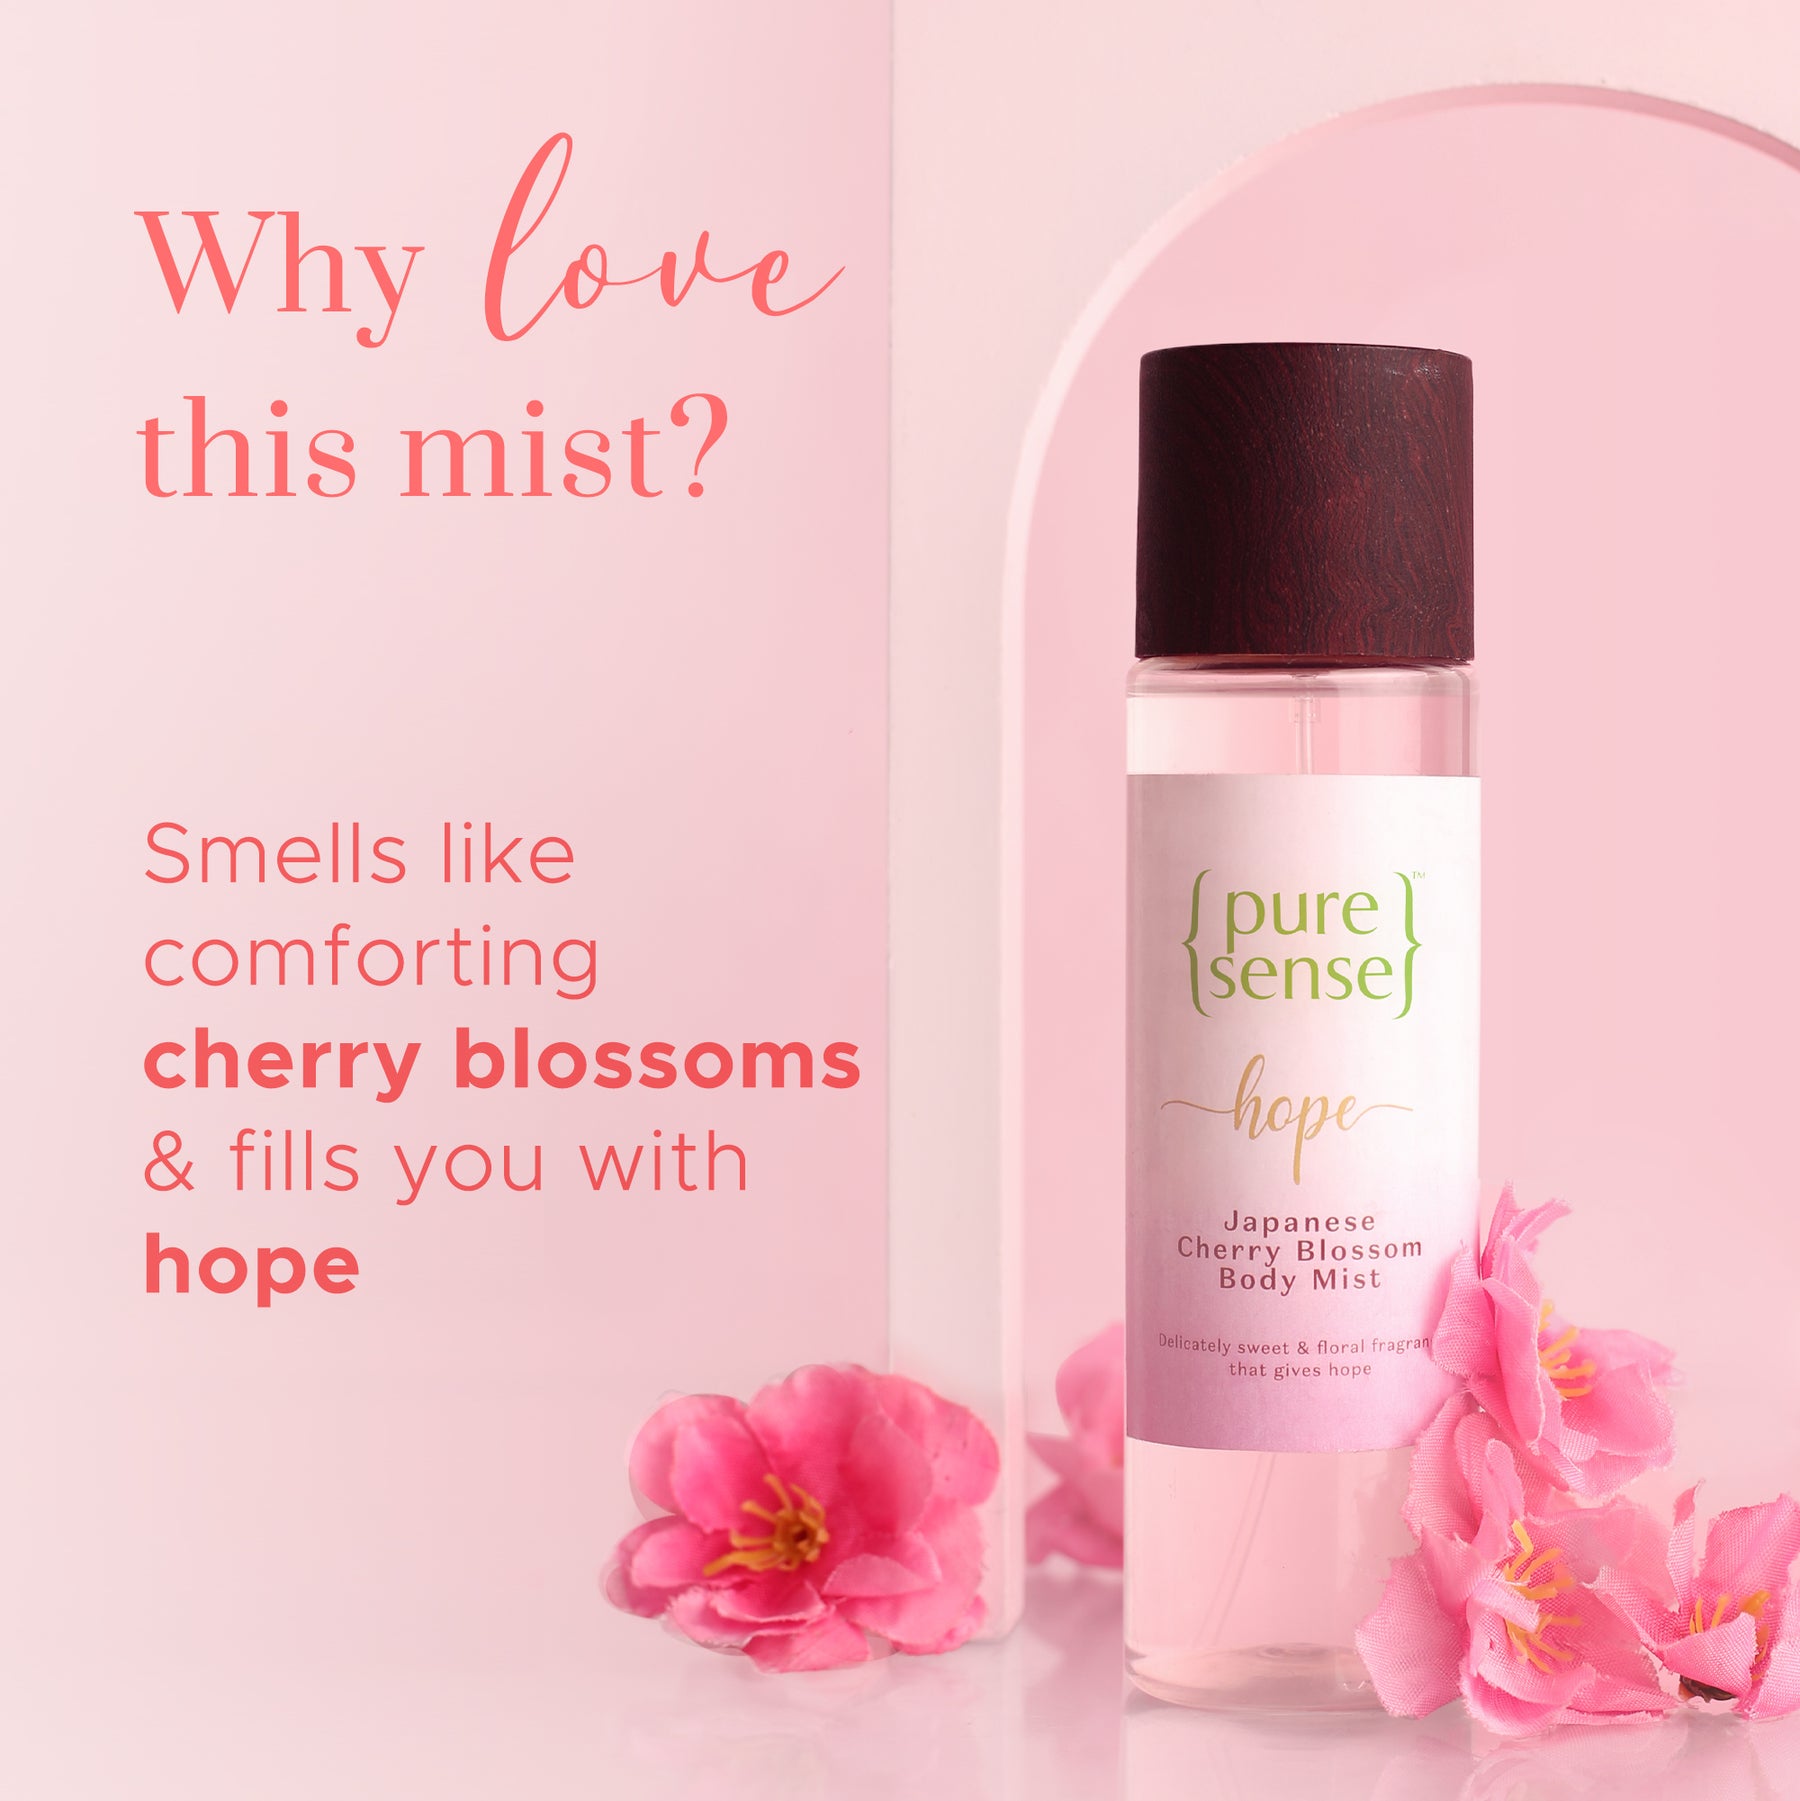 Hope Japanese Cherry Blossom Body Mist | From the makers of Parachute Advansed | 150 ml - PureSense